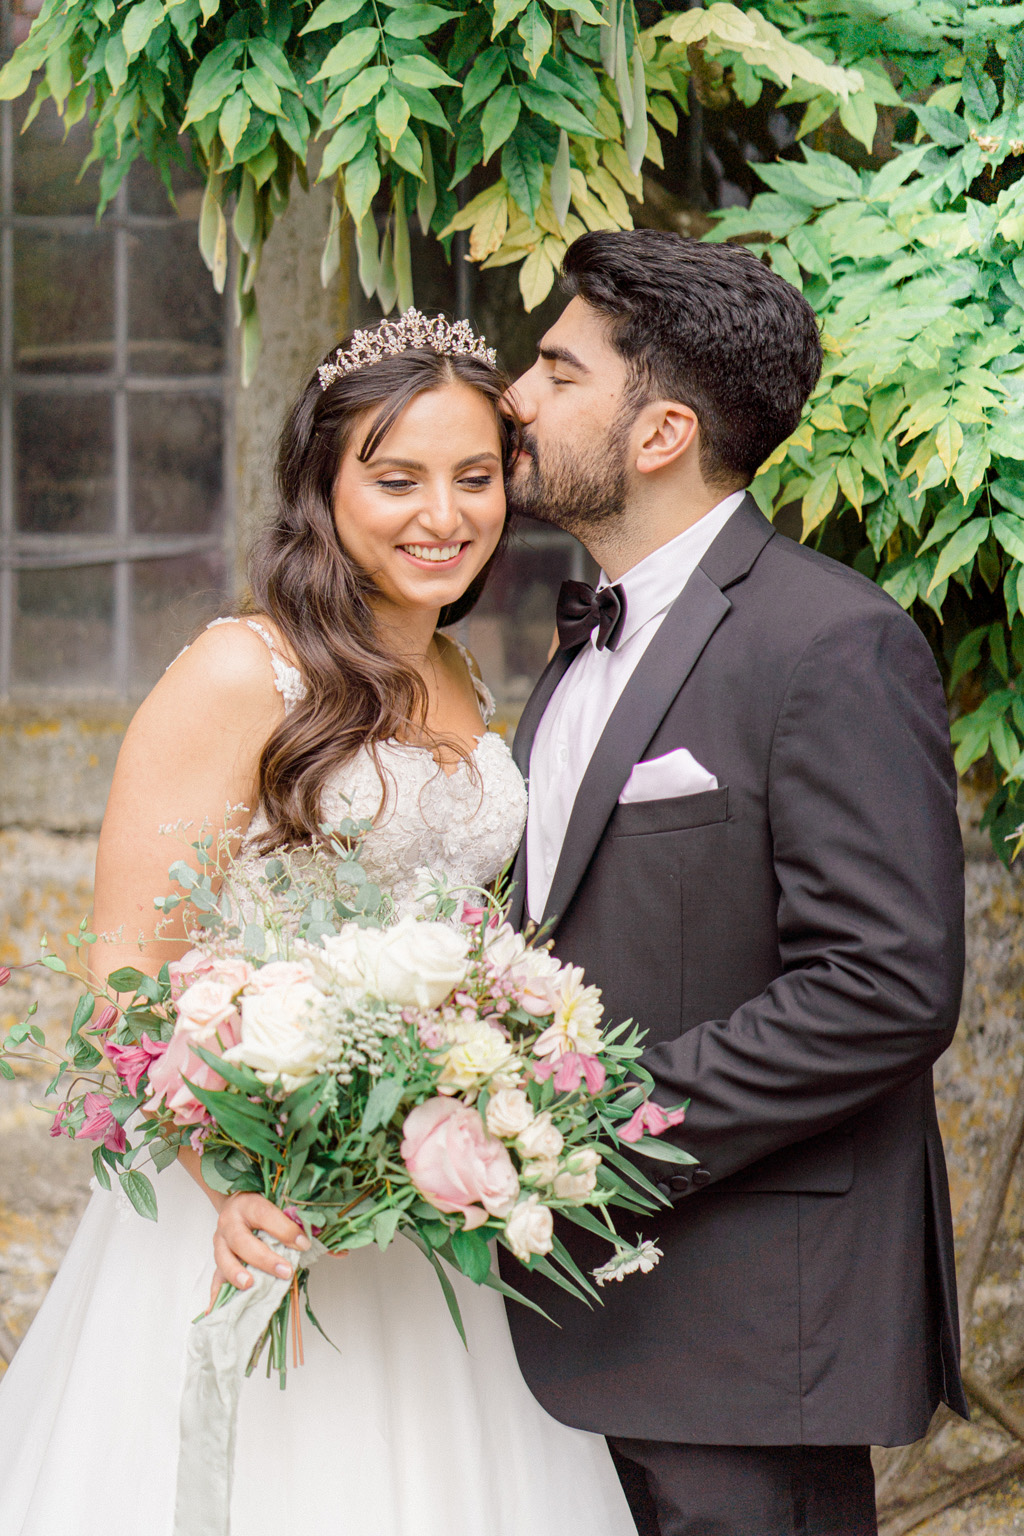 elegant and stylish modern classic wedding ideas from Clearwell Castle. Image credit Sara Cooper Photography